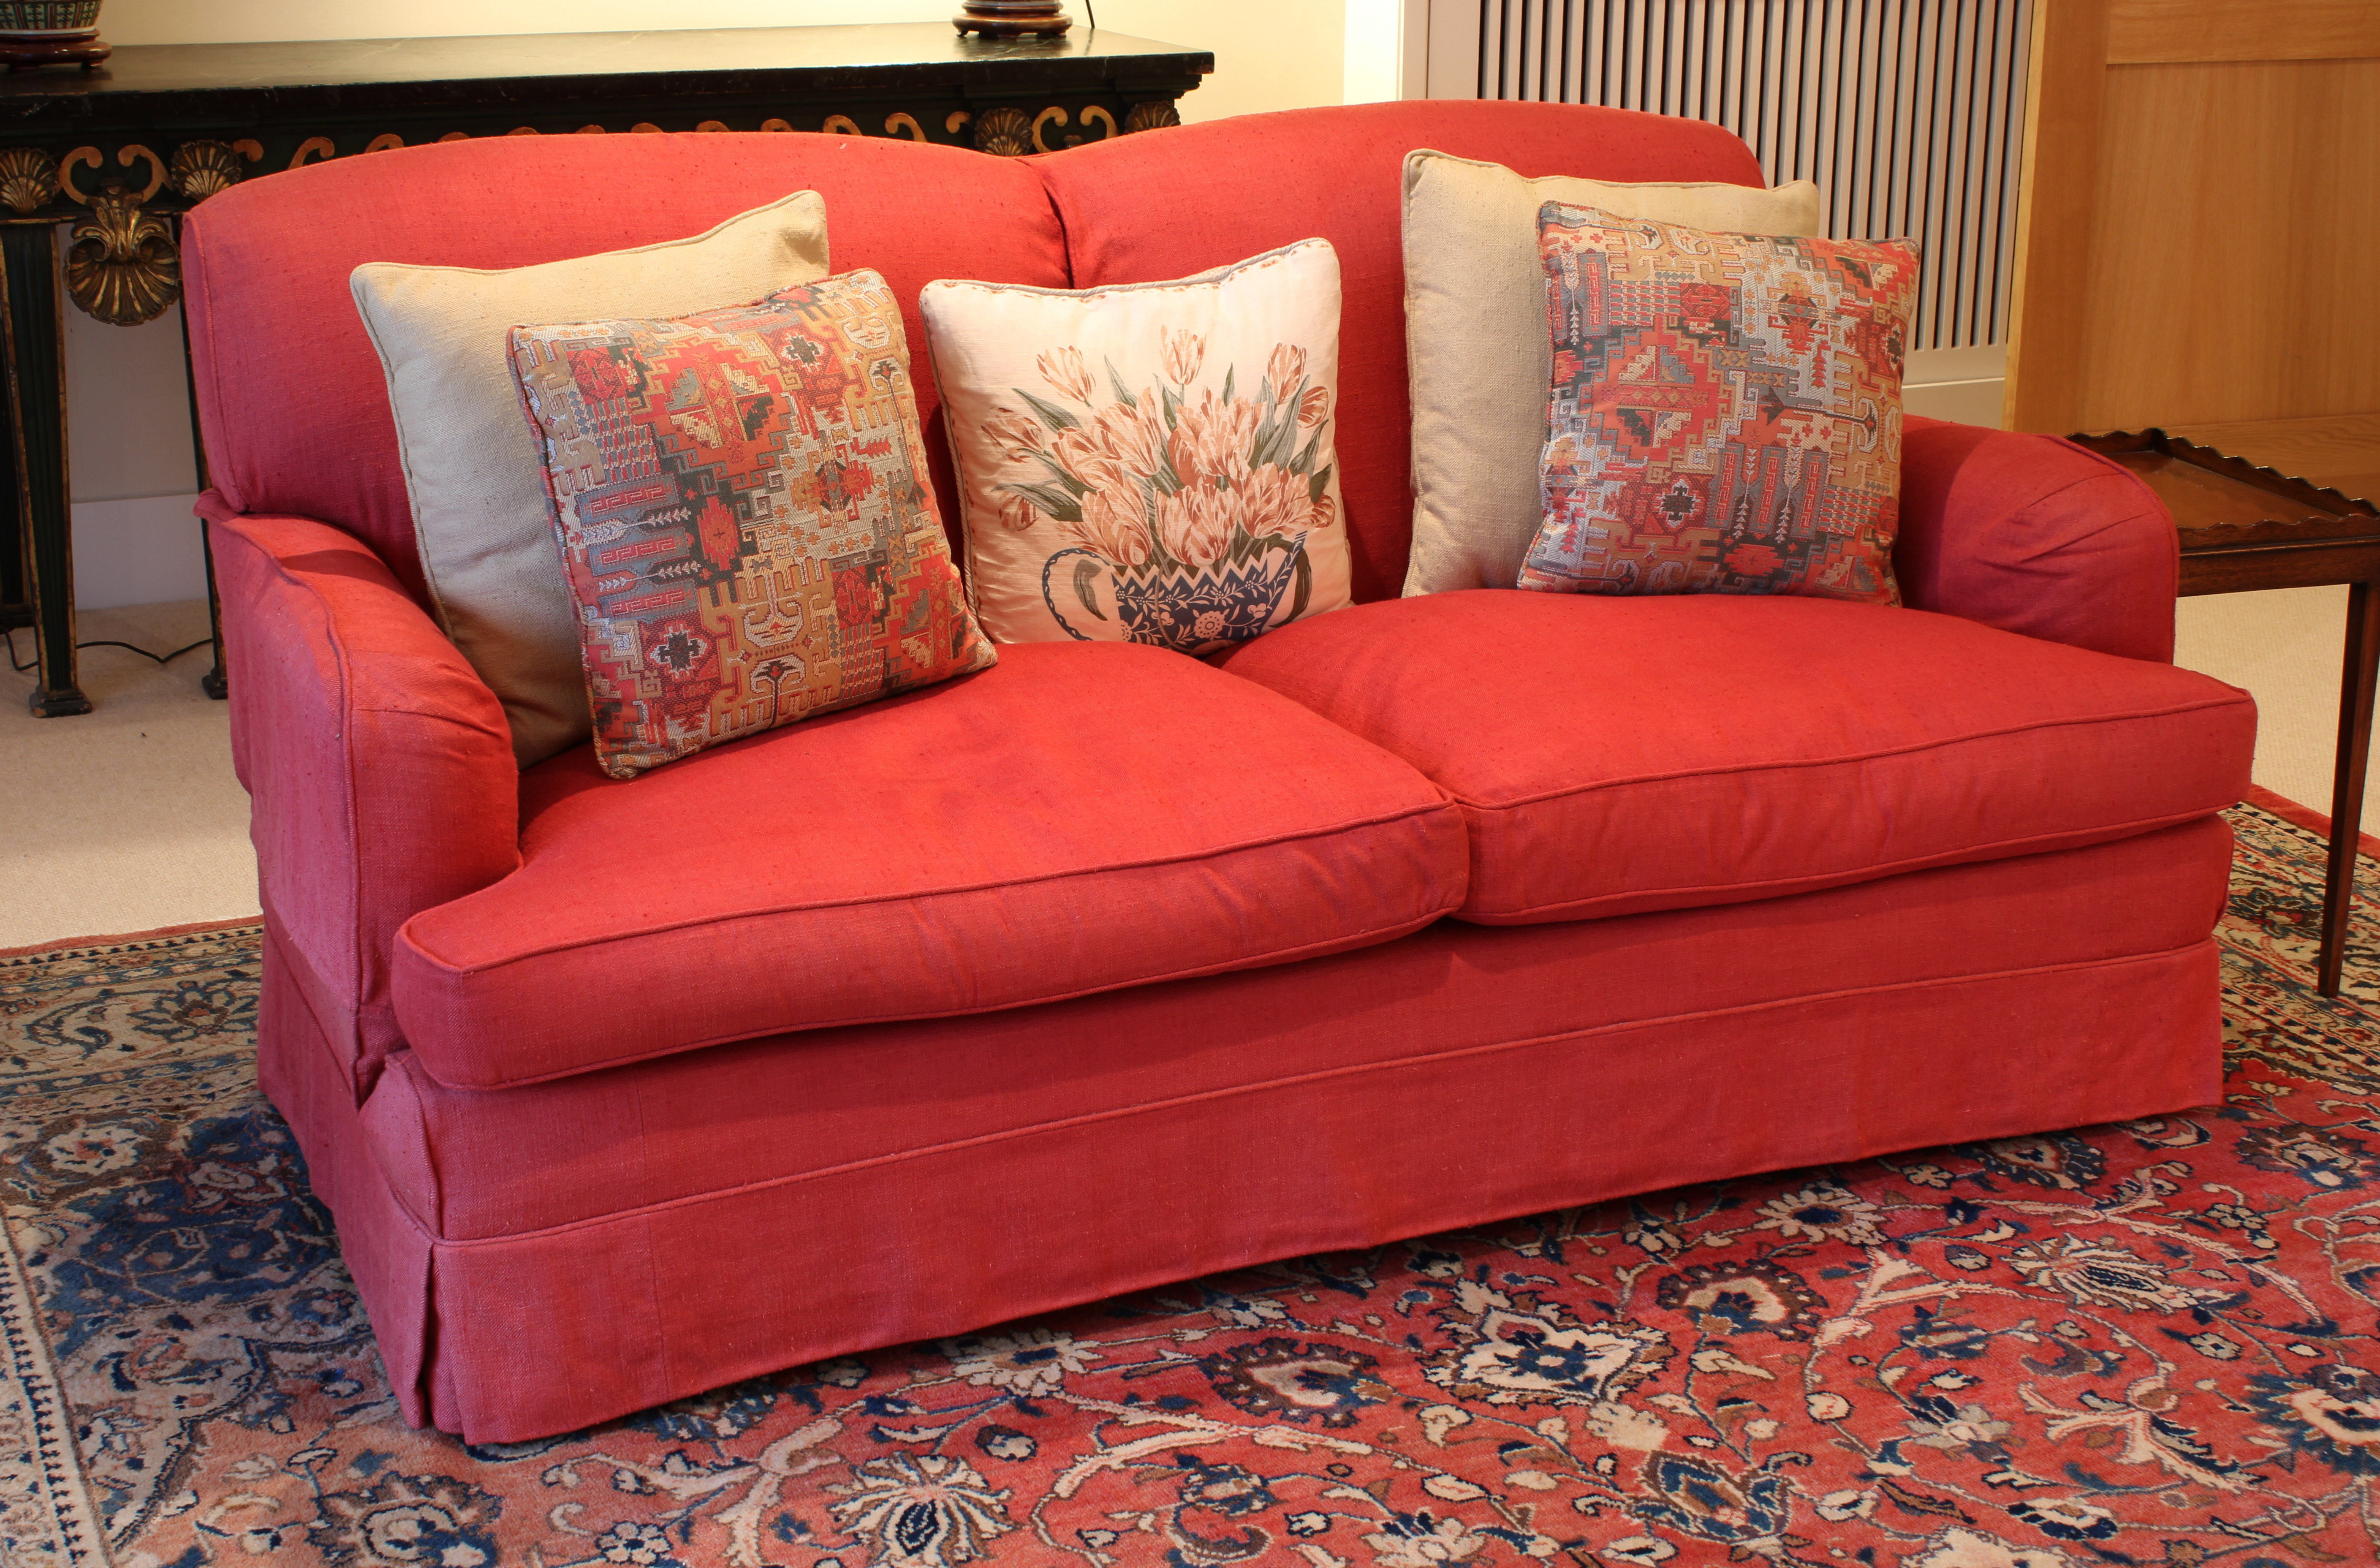 Pair of two seater sofas in red upholstery - Image 2 of 2